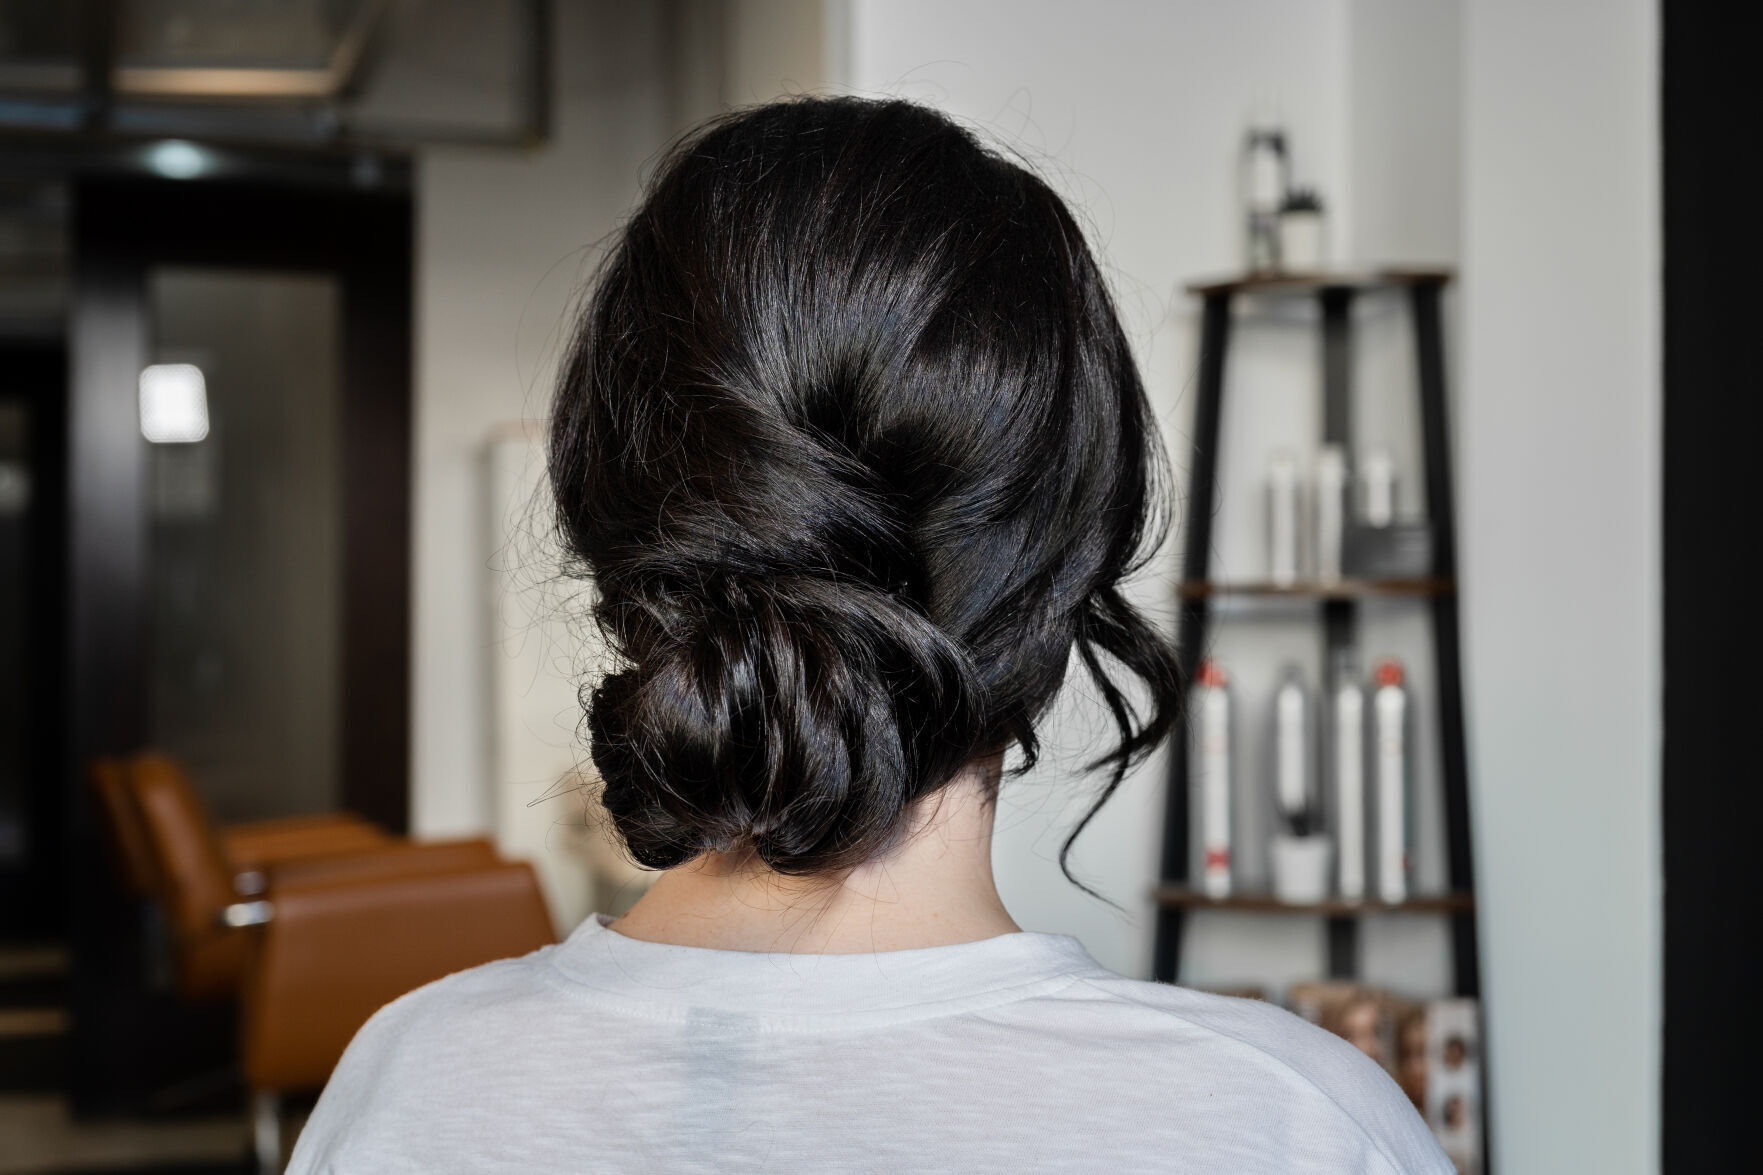 30+ Messy Bun Hairstyles That Are Easy To Do For Every Hair Type